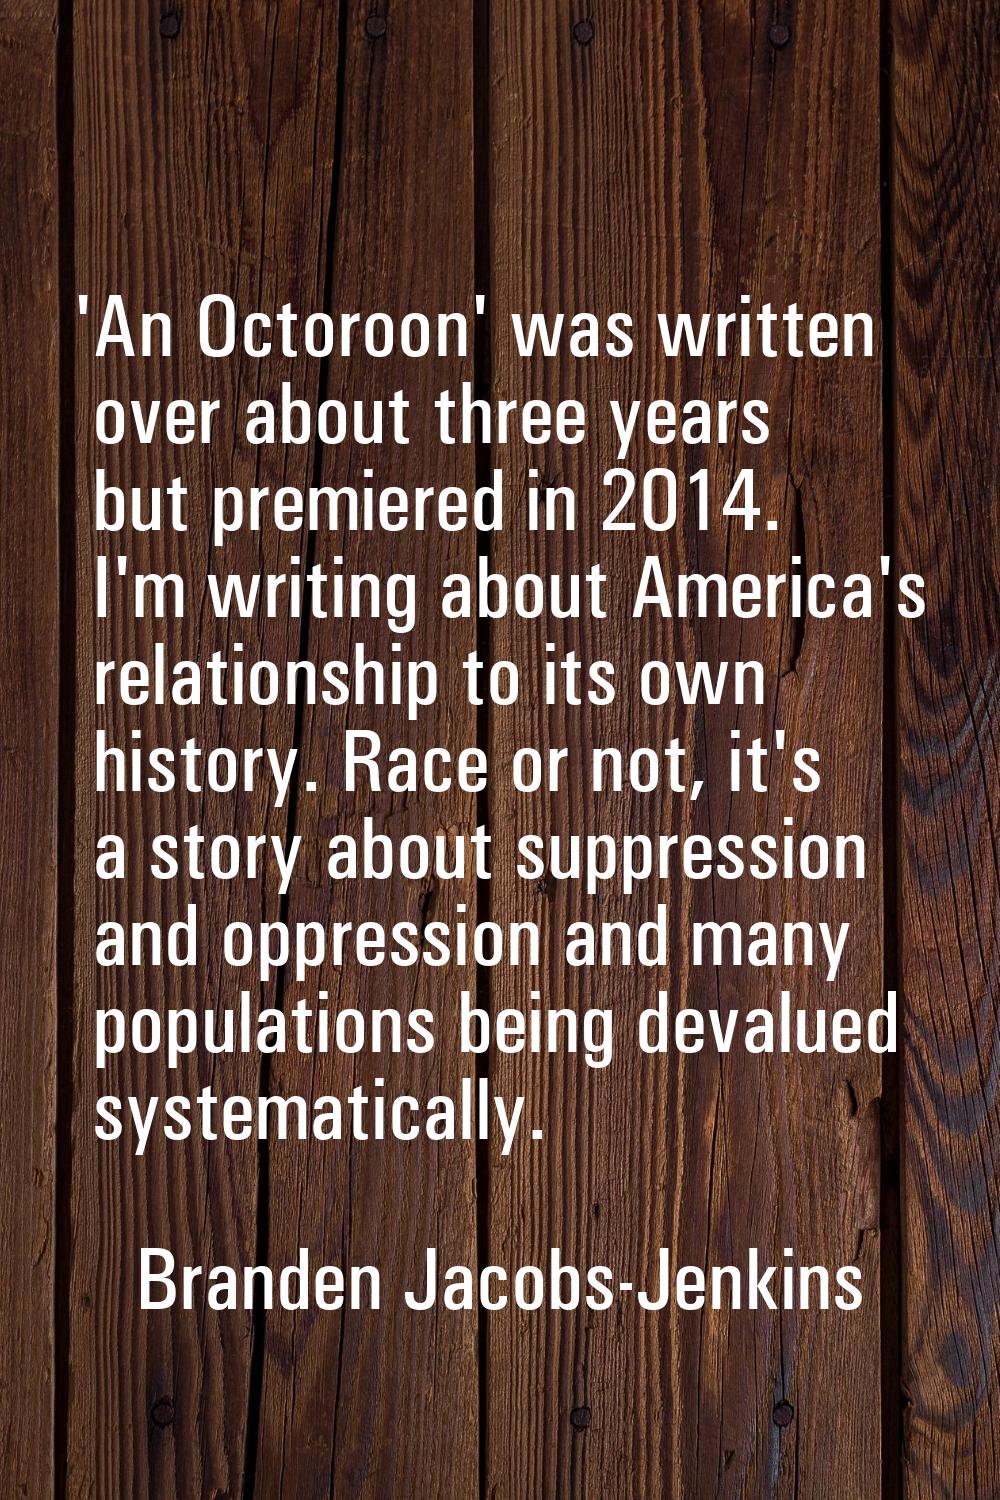 'An Octoroon' was written over about three years but premiered in 2014. I'm writing about America's